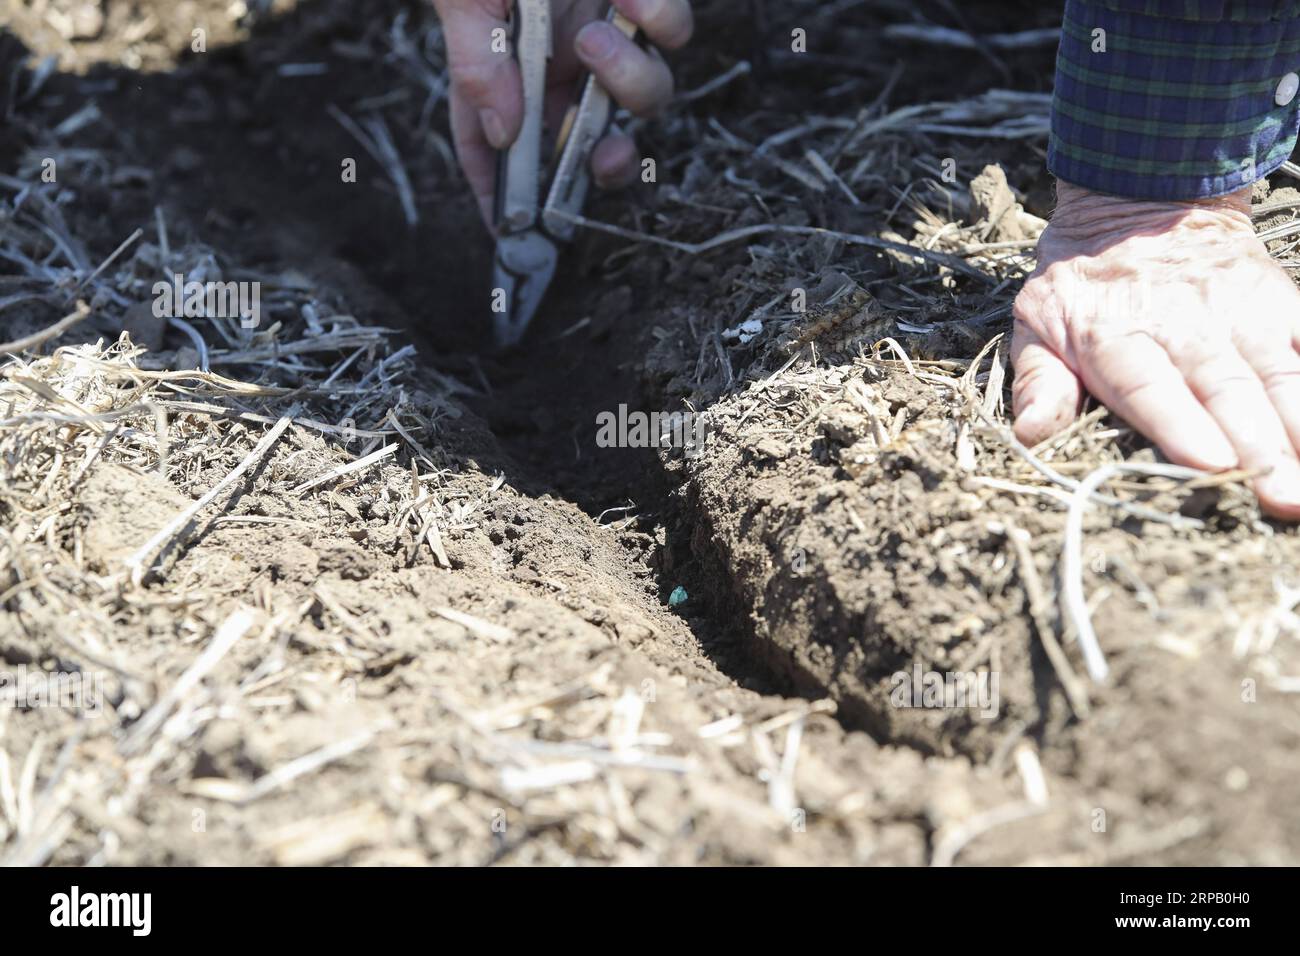 (190523) -- IOWA, May 23, 2019 (Xinhua) -- Bill Pellett examines the depth of the seed after his son Bret plants corn with a planter machine at their family farm in Atlantic of Cass county, Iowa, the United States, April 24, 2019. Bill Pellett knows how to farm, but just like most of his peers across the country, the 71-year-old farmer is feeling less assured of what he could get from a new year of farming, as there appears to be no quick resolution of the year-long trade disputes between the United States and China. TO GO WITH Spotlight: Leading U.S. farming state enters new crop season amid Stock Photo